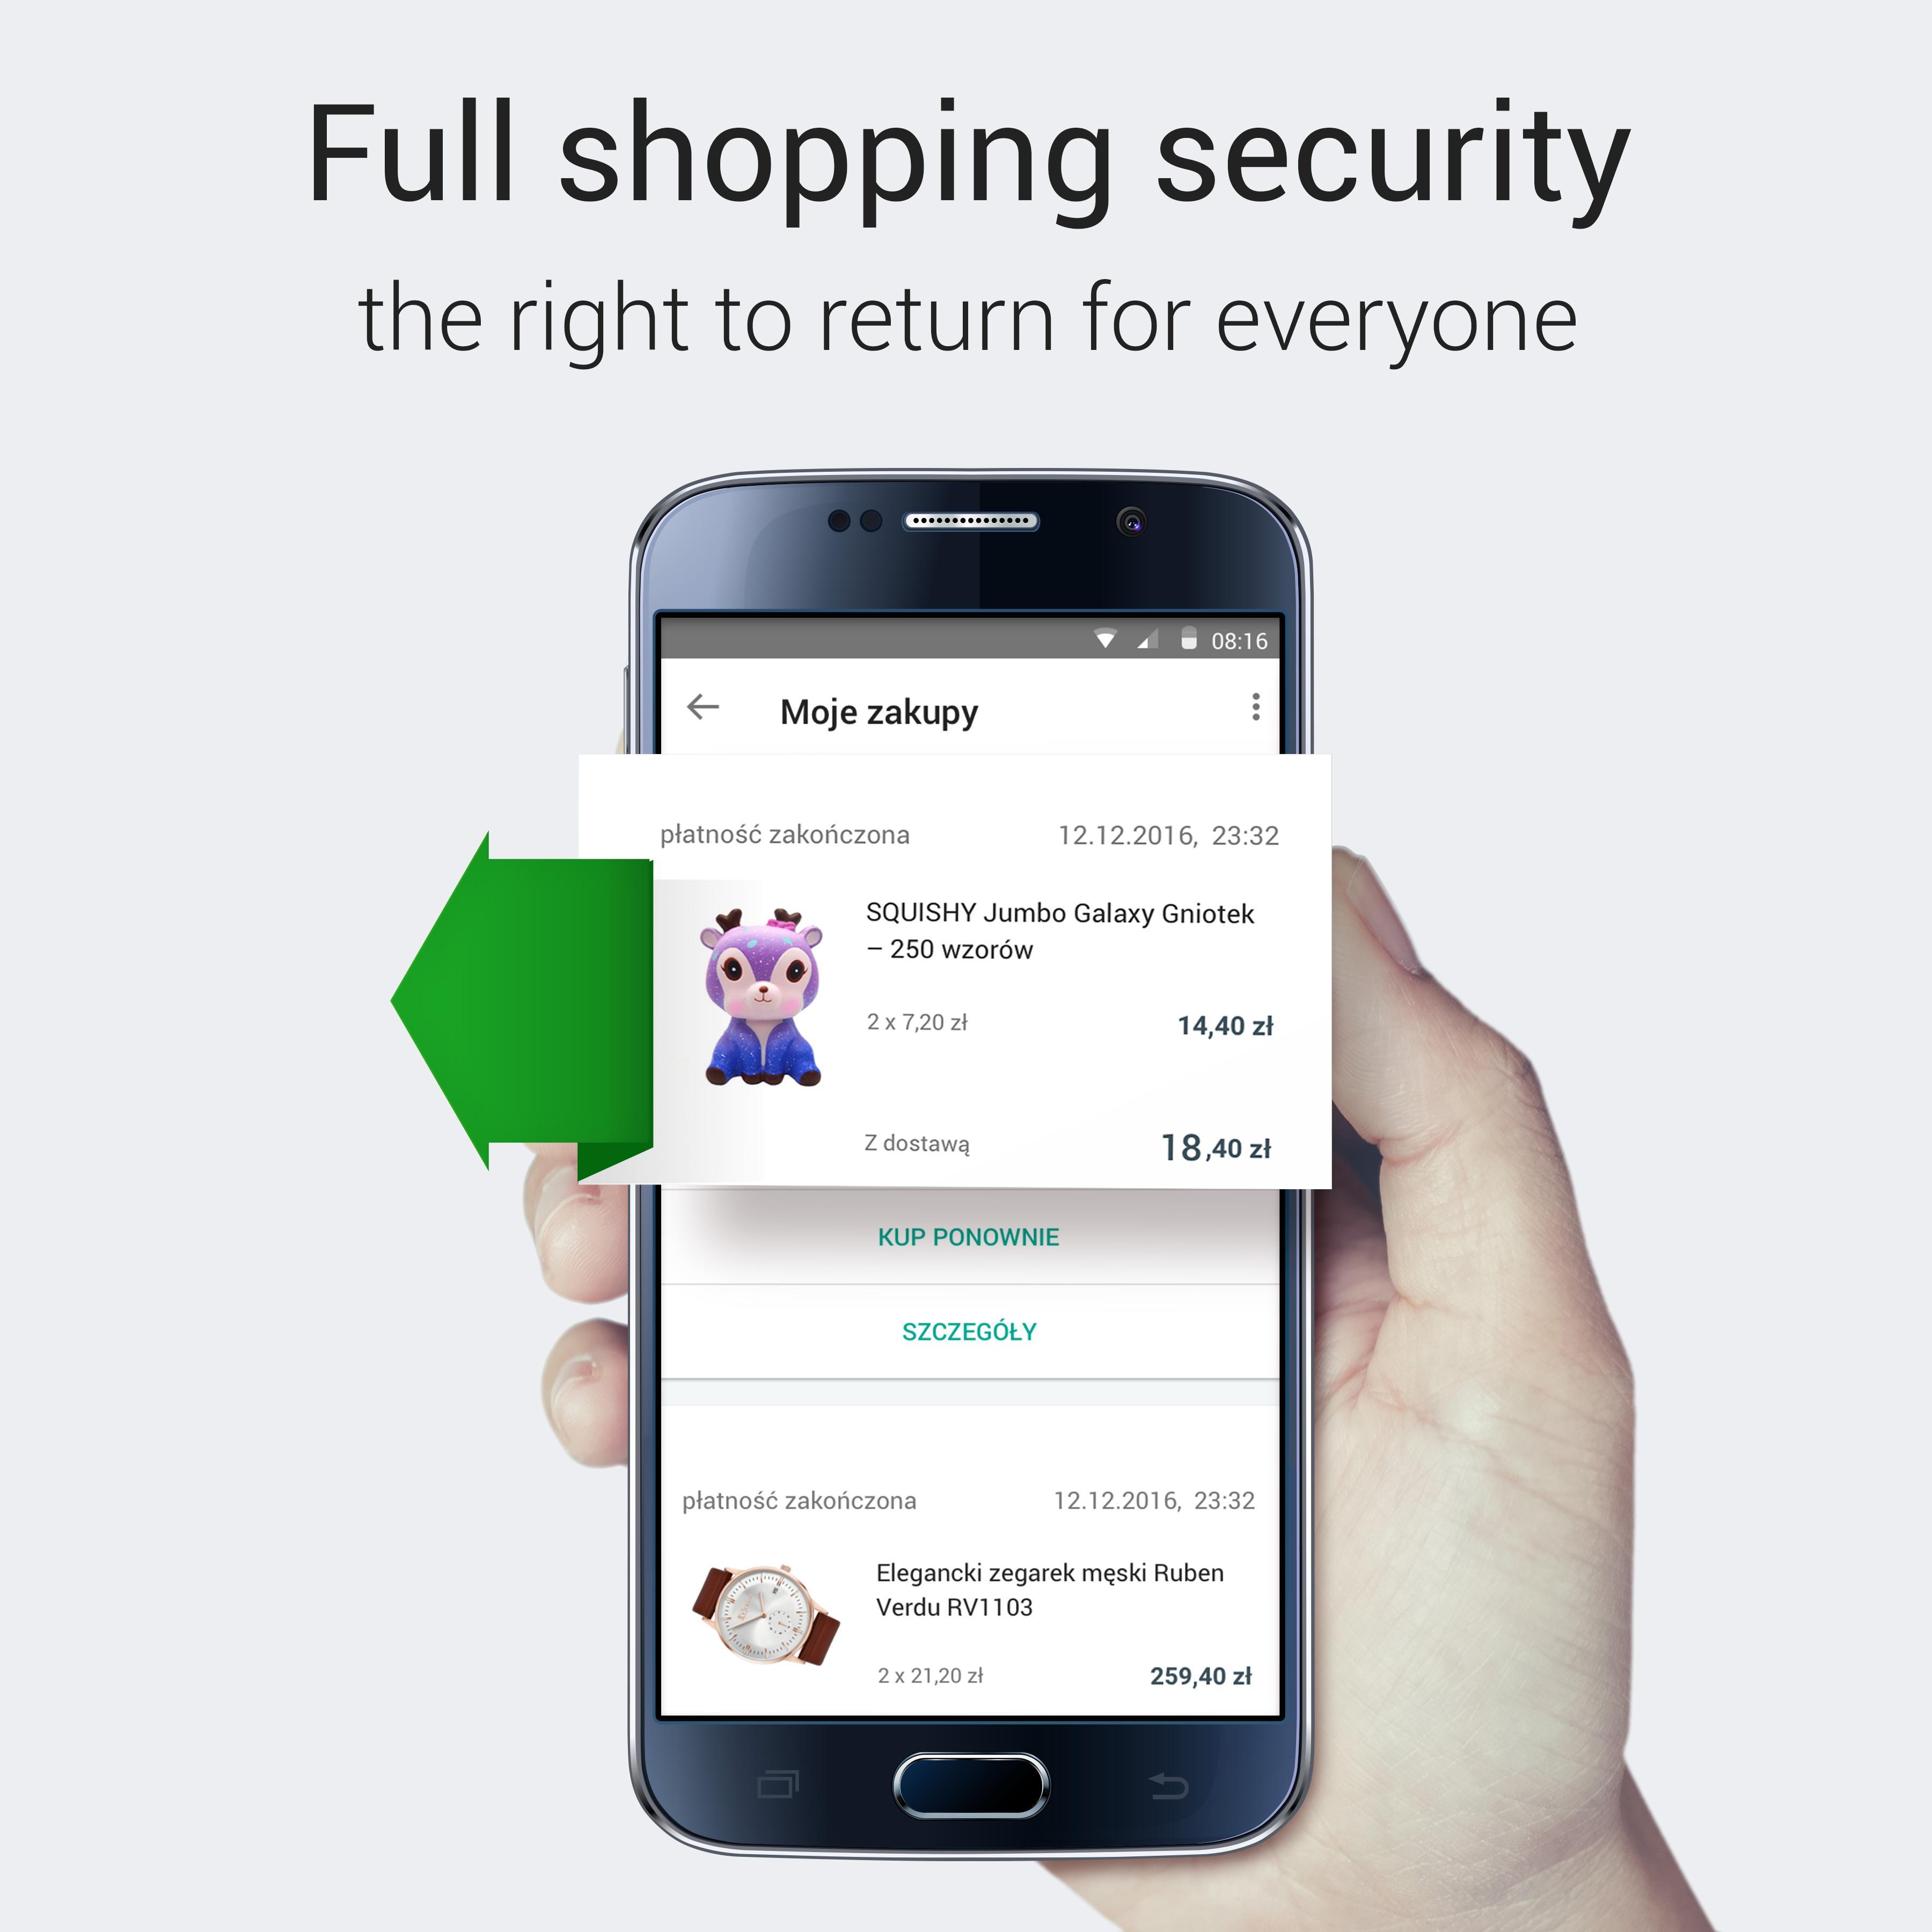 Allegro convenient and secure online shopping 6.56.0 Screenshot 5